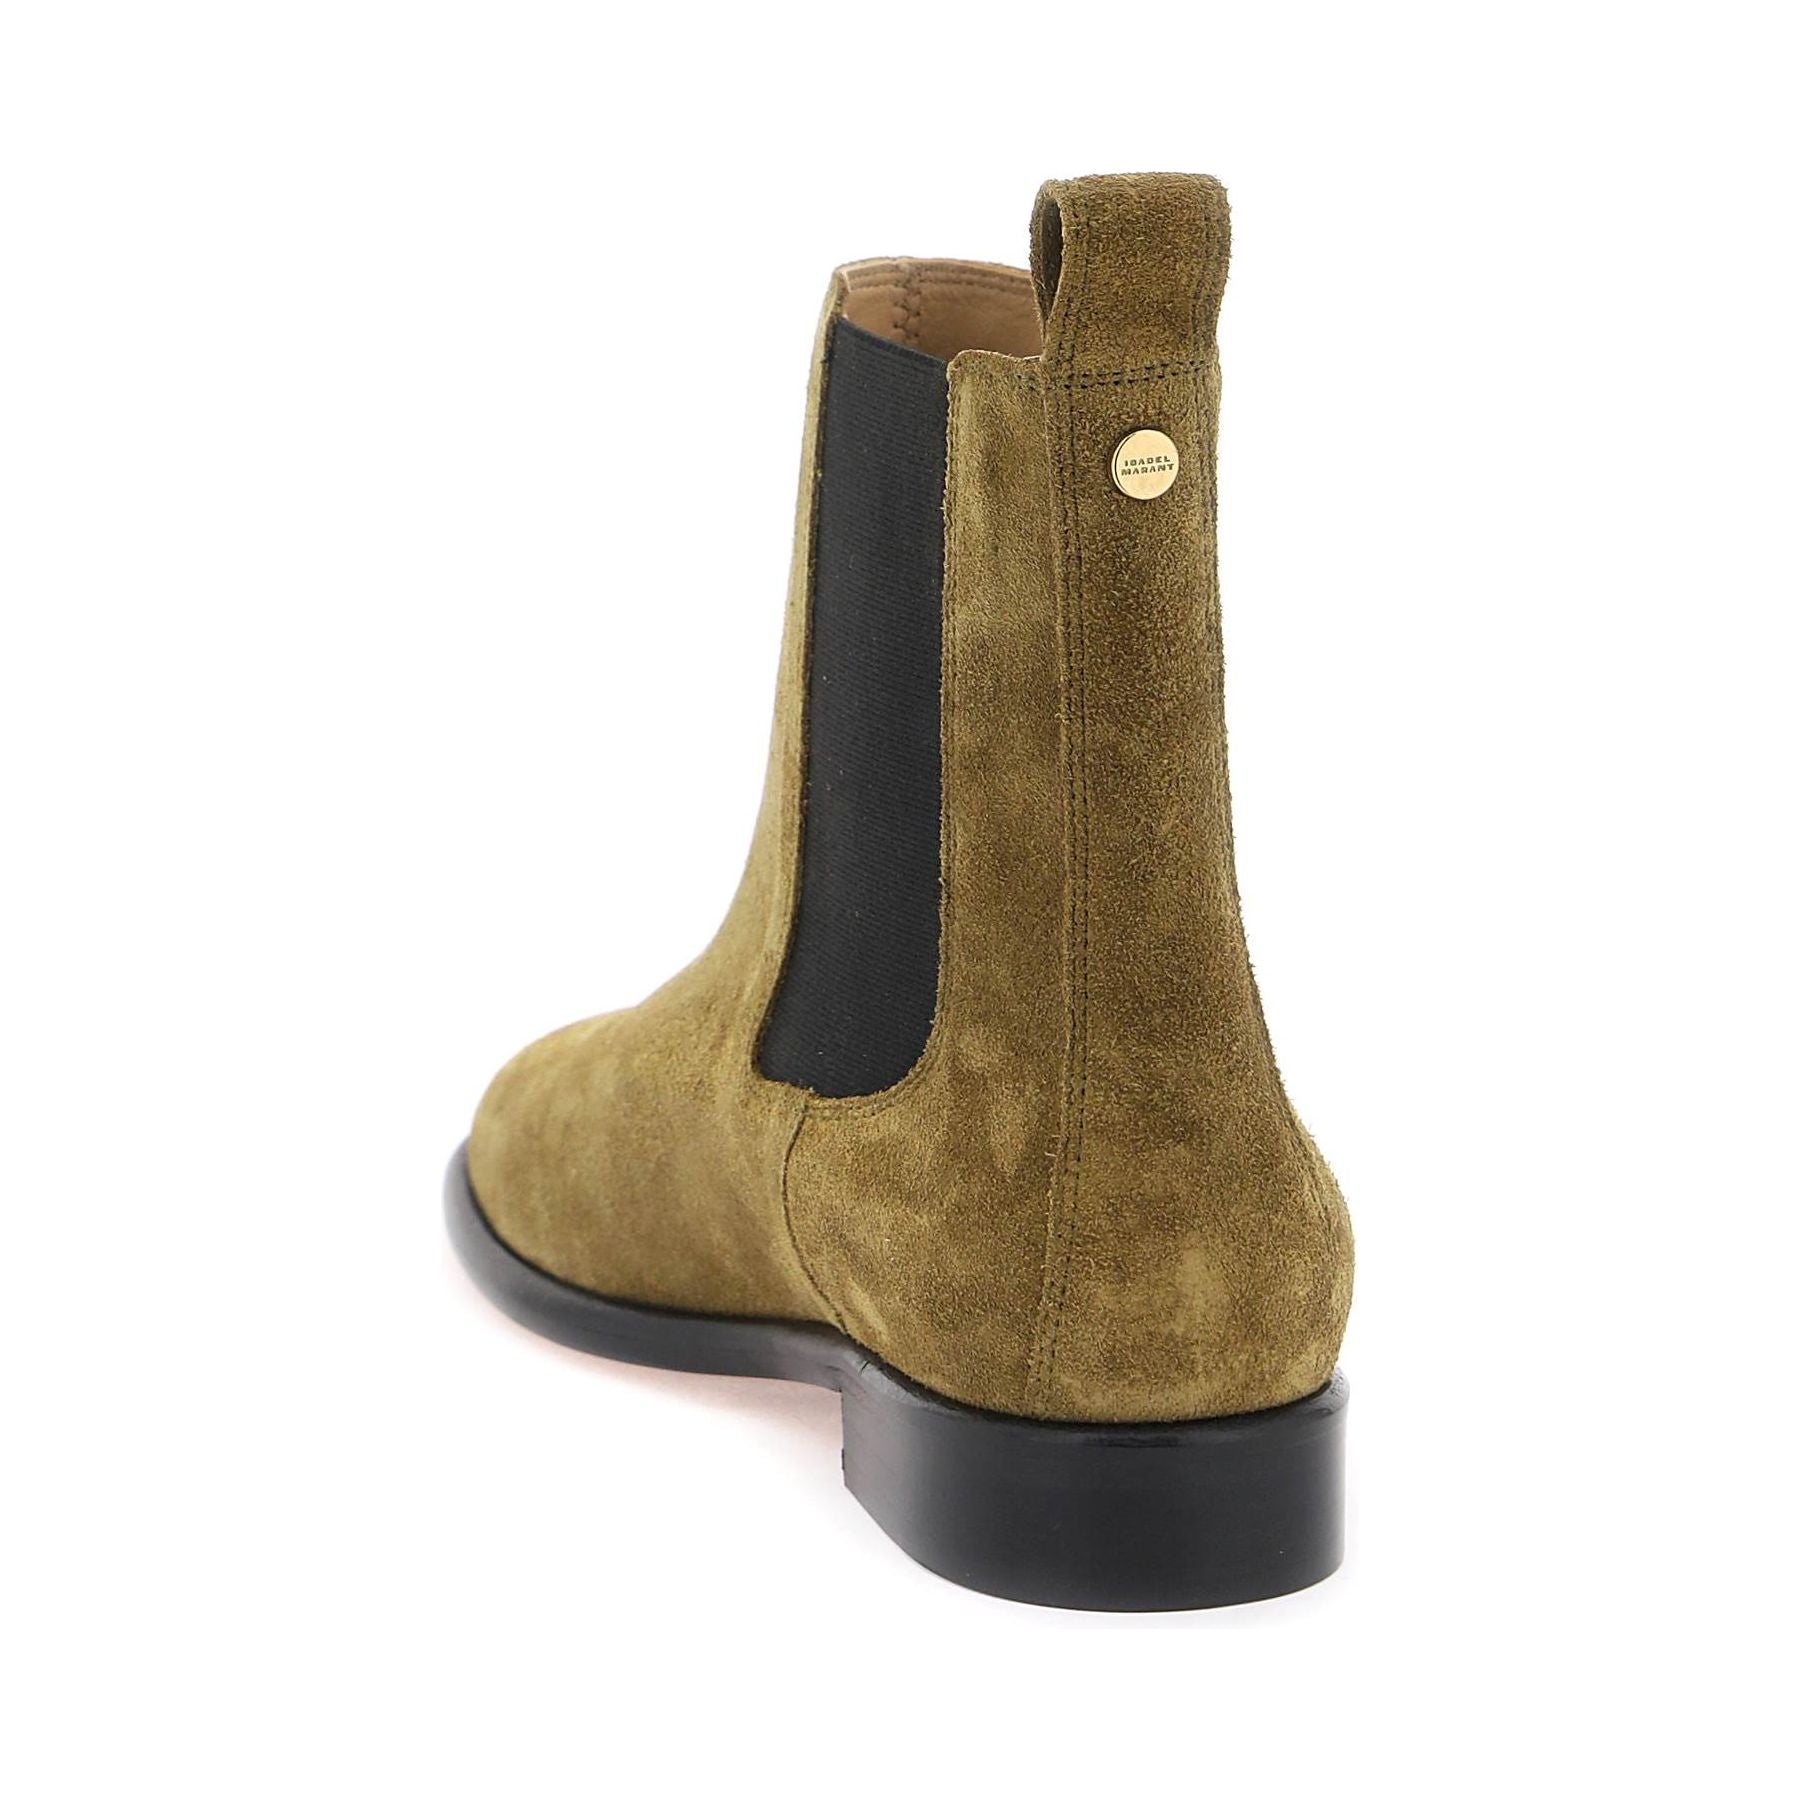 'Galna' Suede Ankle Boots